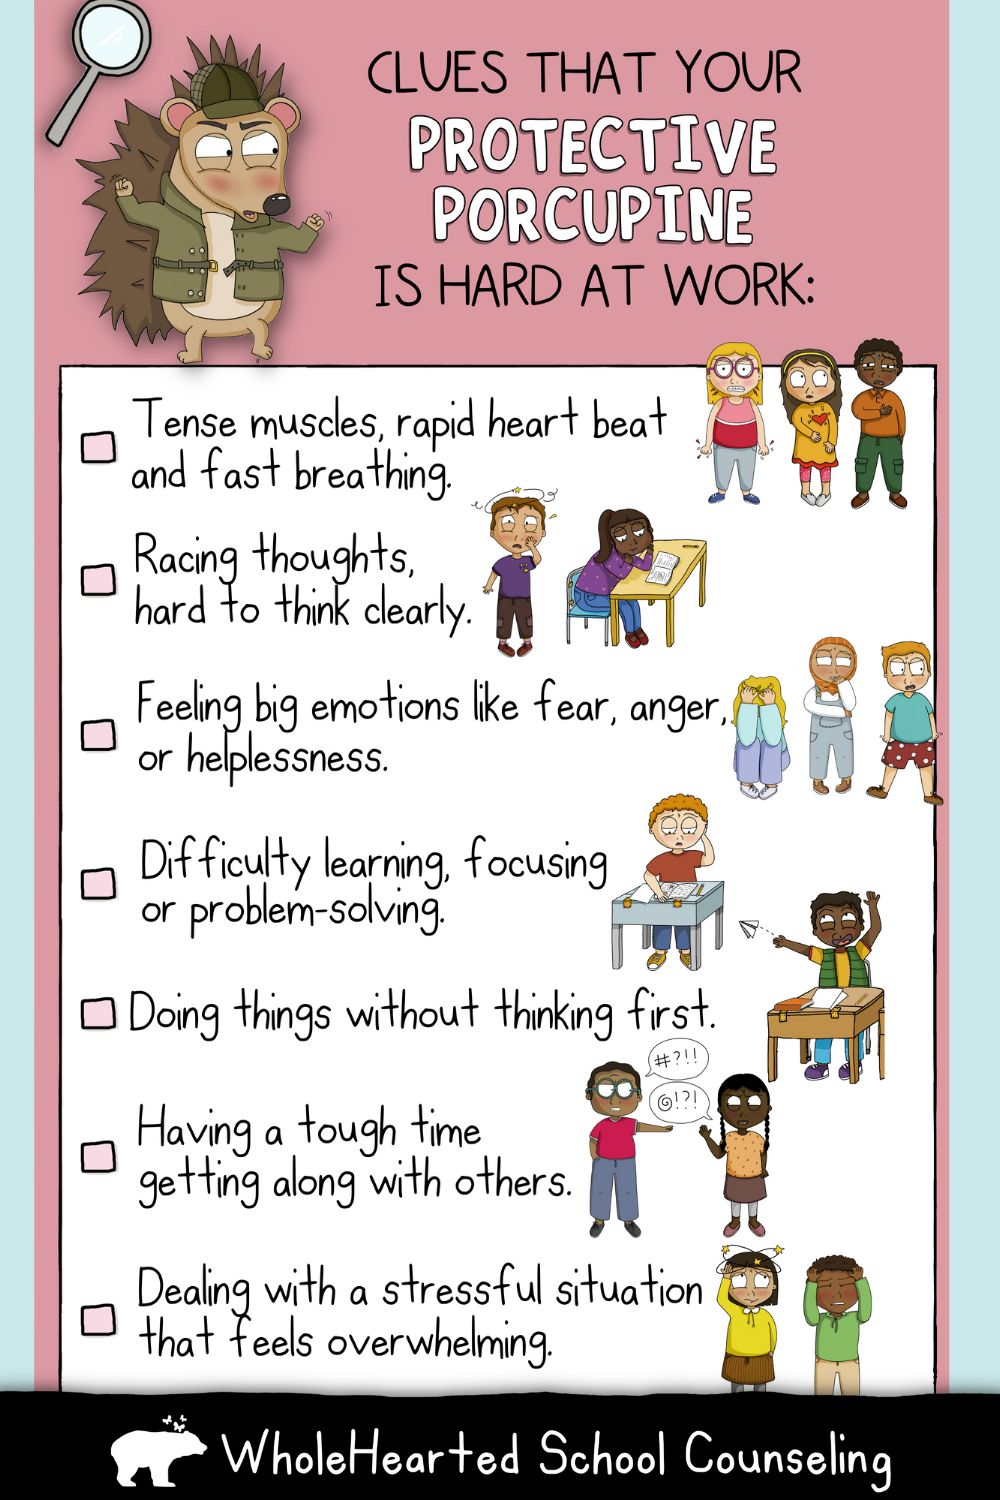 Signs of a stress response for kids.